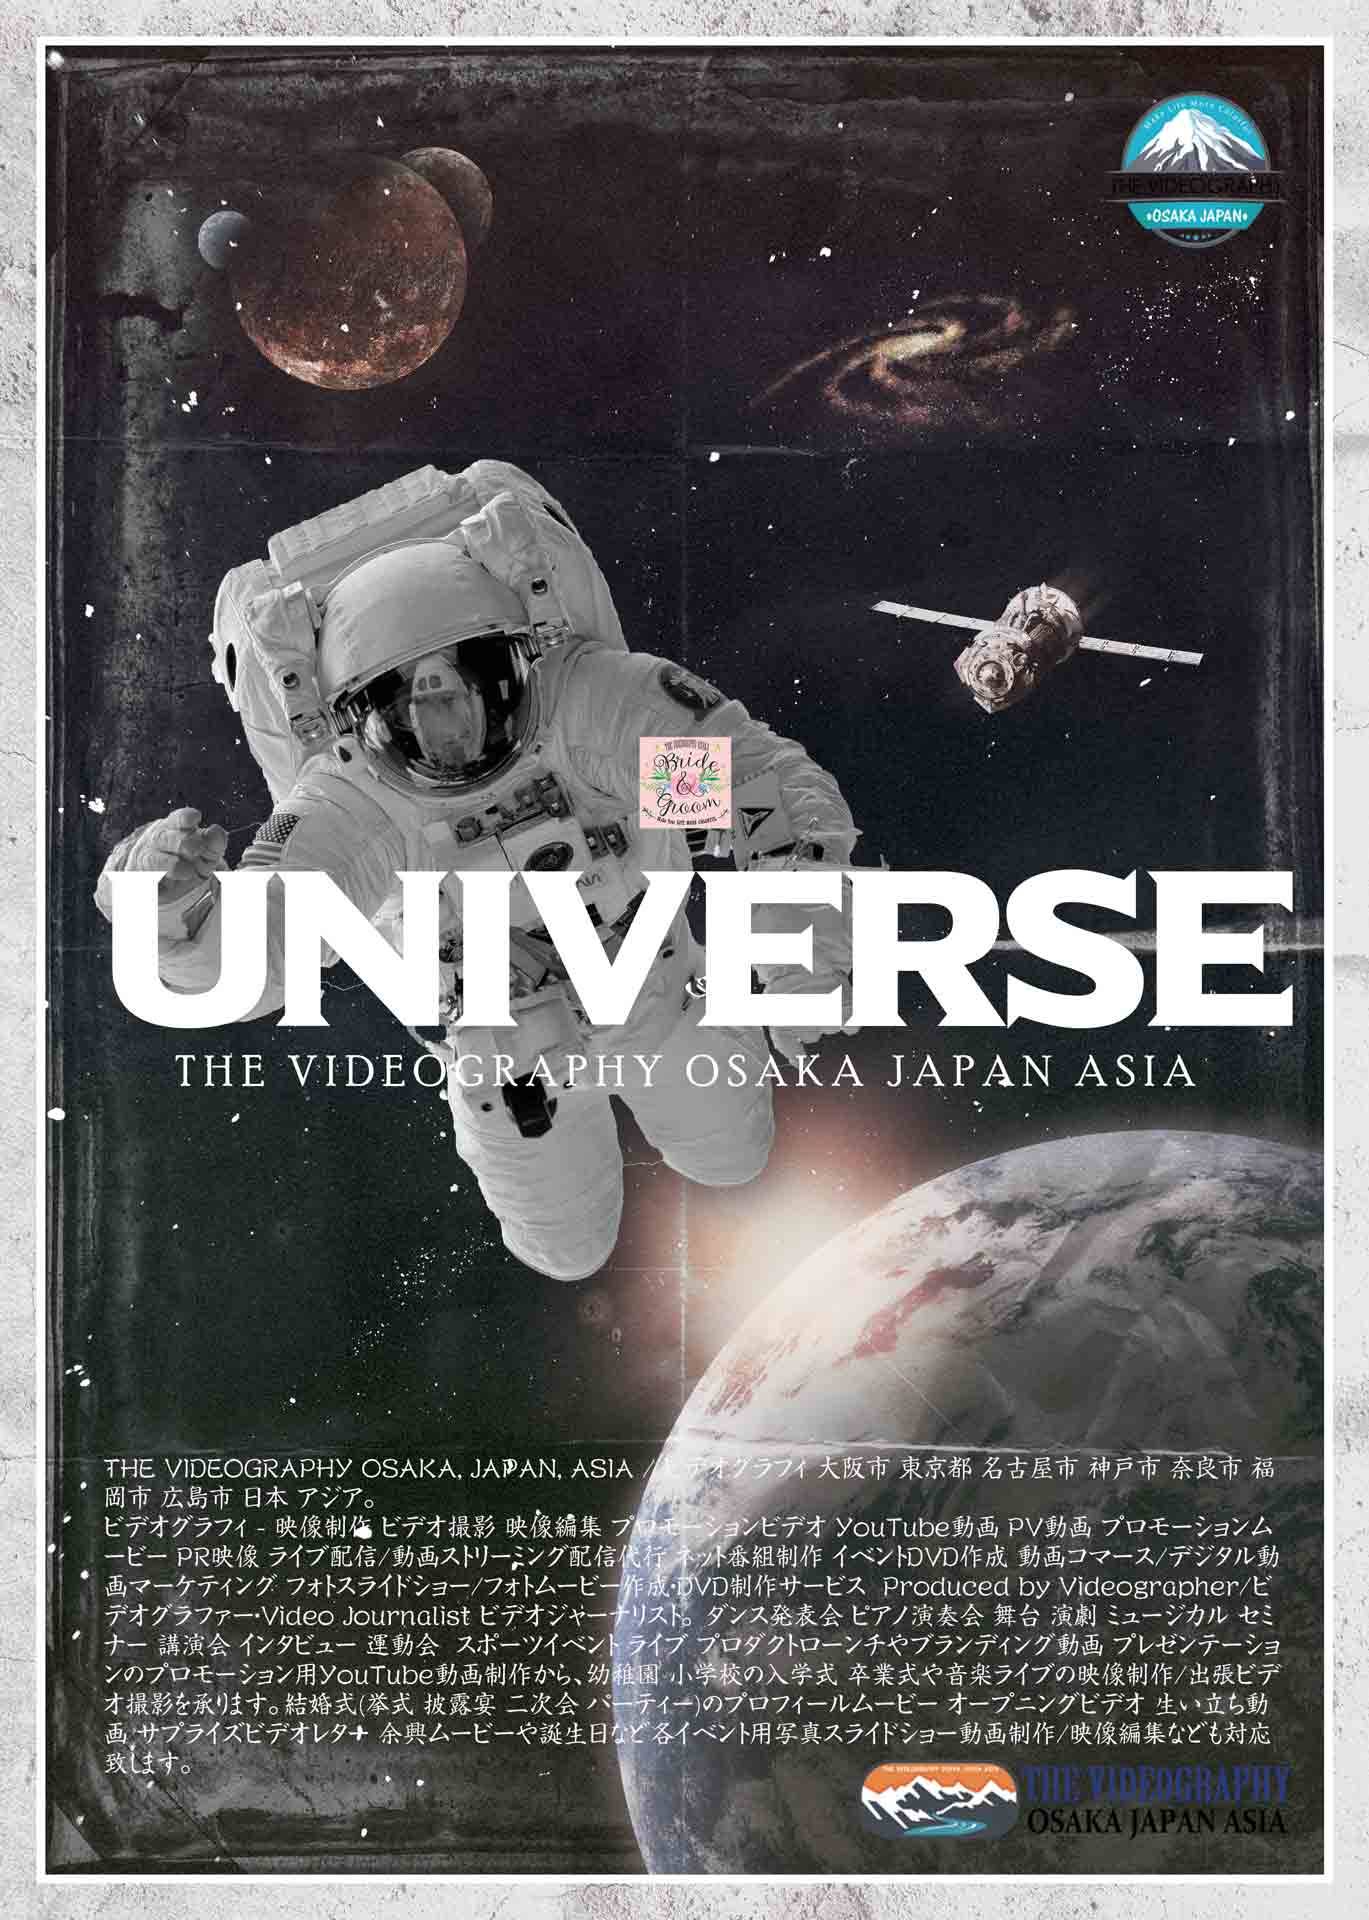 Who win the first prize? Who wanna be the first private astronaut? Meet Universe Movie Project. あなたの夢を叶えます。PVとして動画上で、夢の月面旅行 宇宙遊泳や銀河系の探索が可能です。